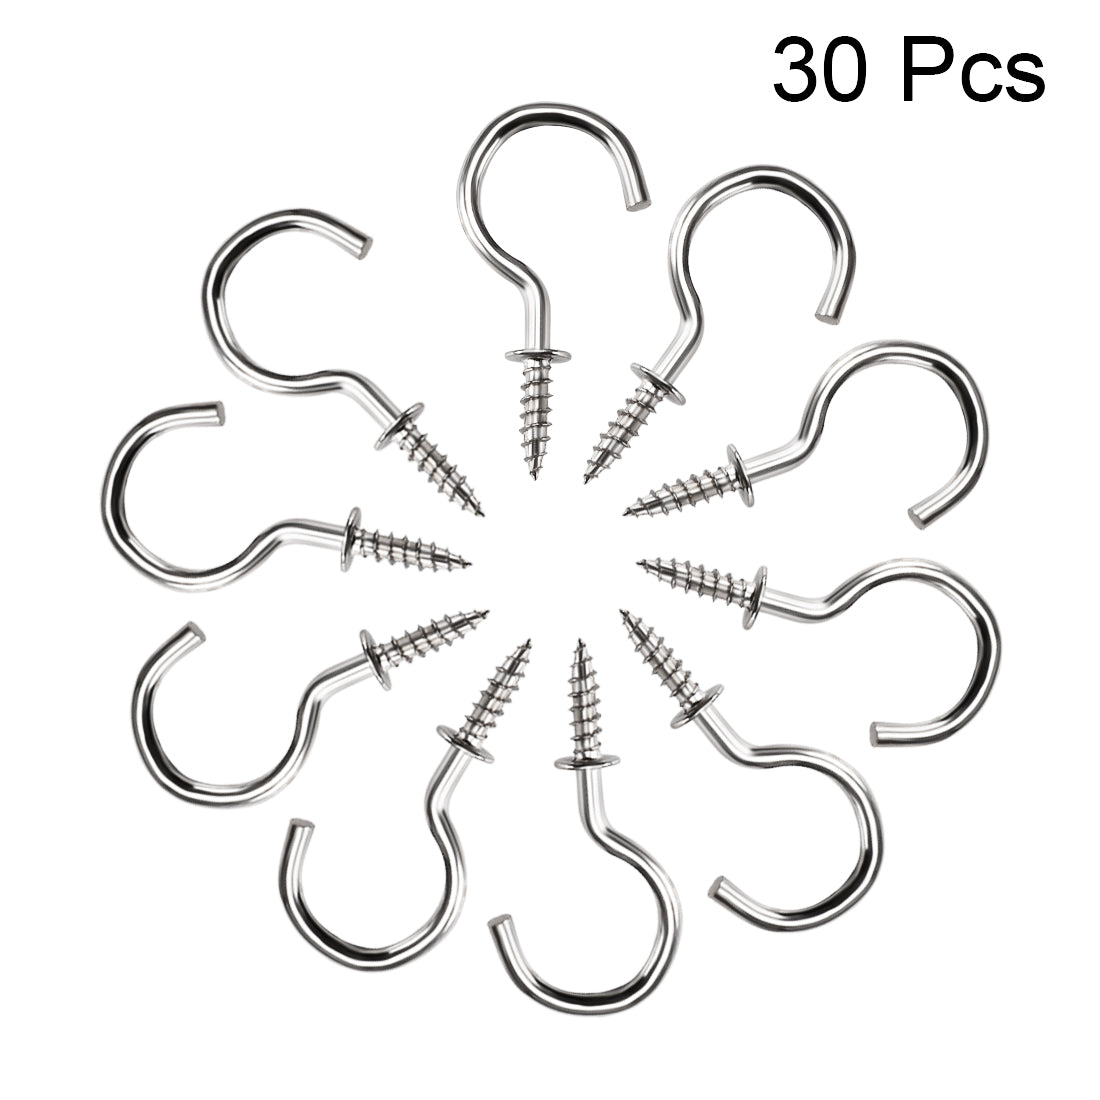 uxcell Uxcell 1.5" Screw Eye Hooks Self Tapping Screws Screw-in Hanger Eye-Shape Ring Hooks with Plate Silver 30pcs